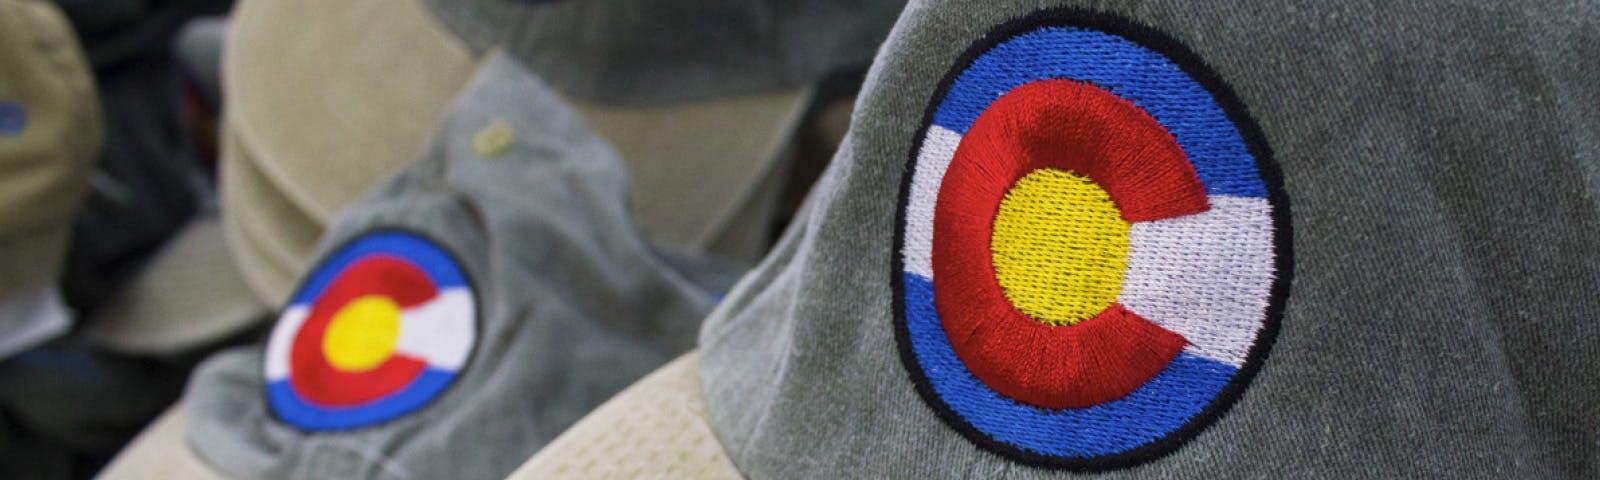 Exquisite hats embroidered with vibrant colors and an intricate Colorado flag design